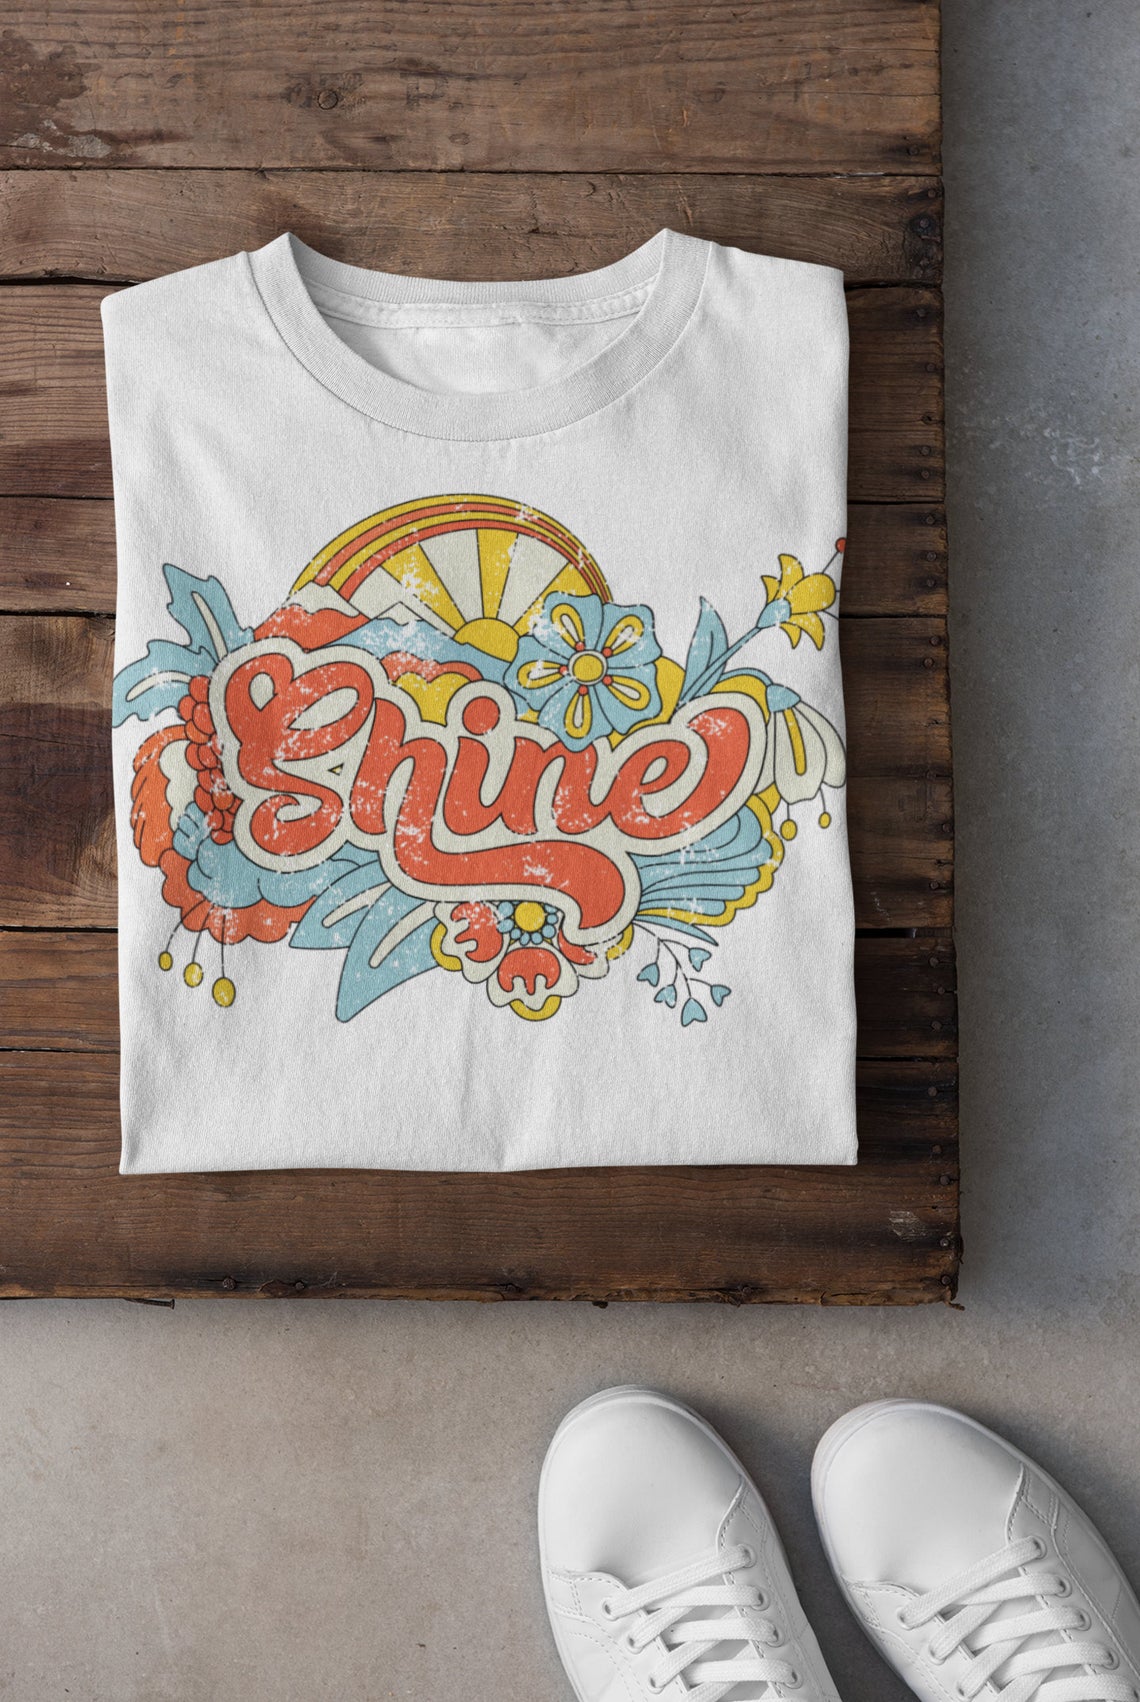 Shine Sweet Summertime Retro VIbes Tee/ Toddler, Youth, and Adult Sizing Available